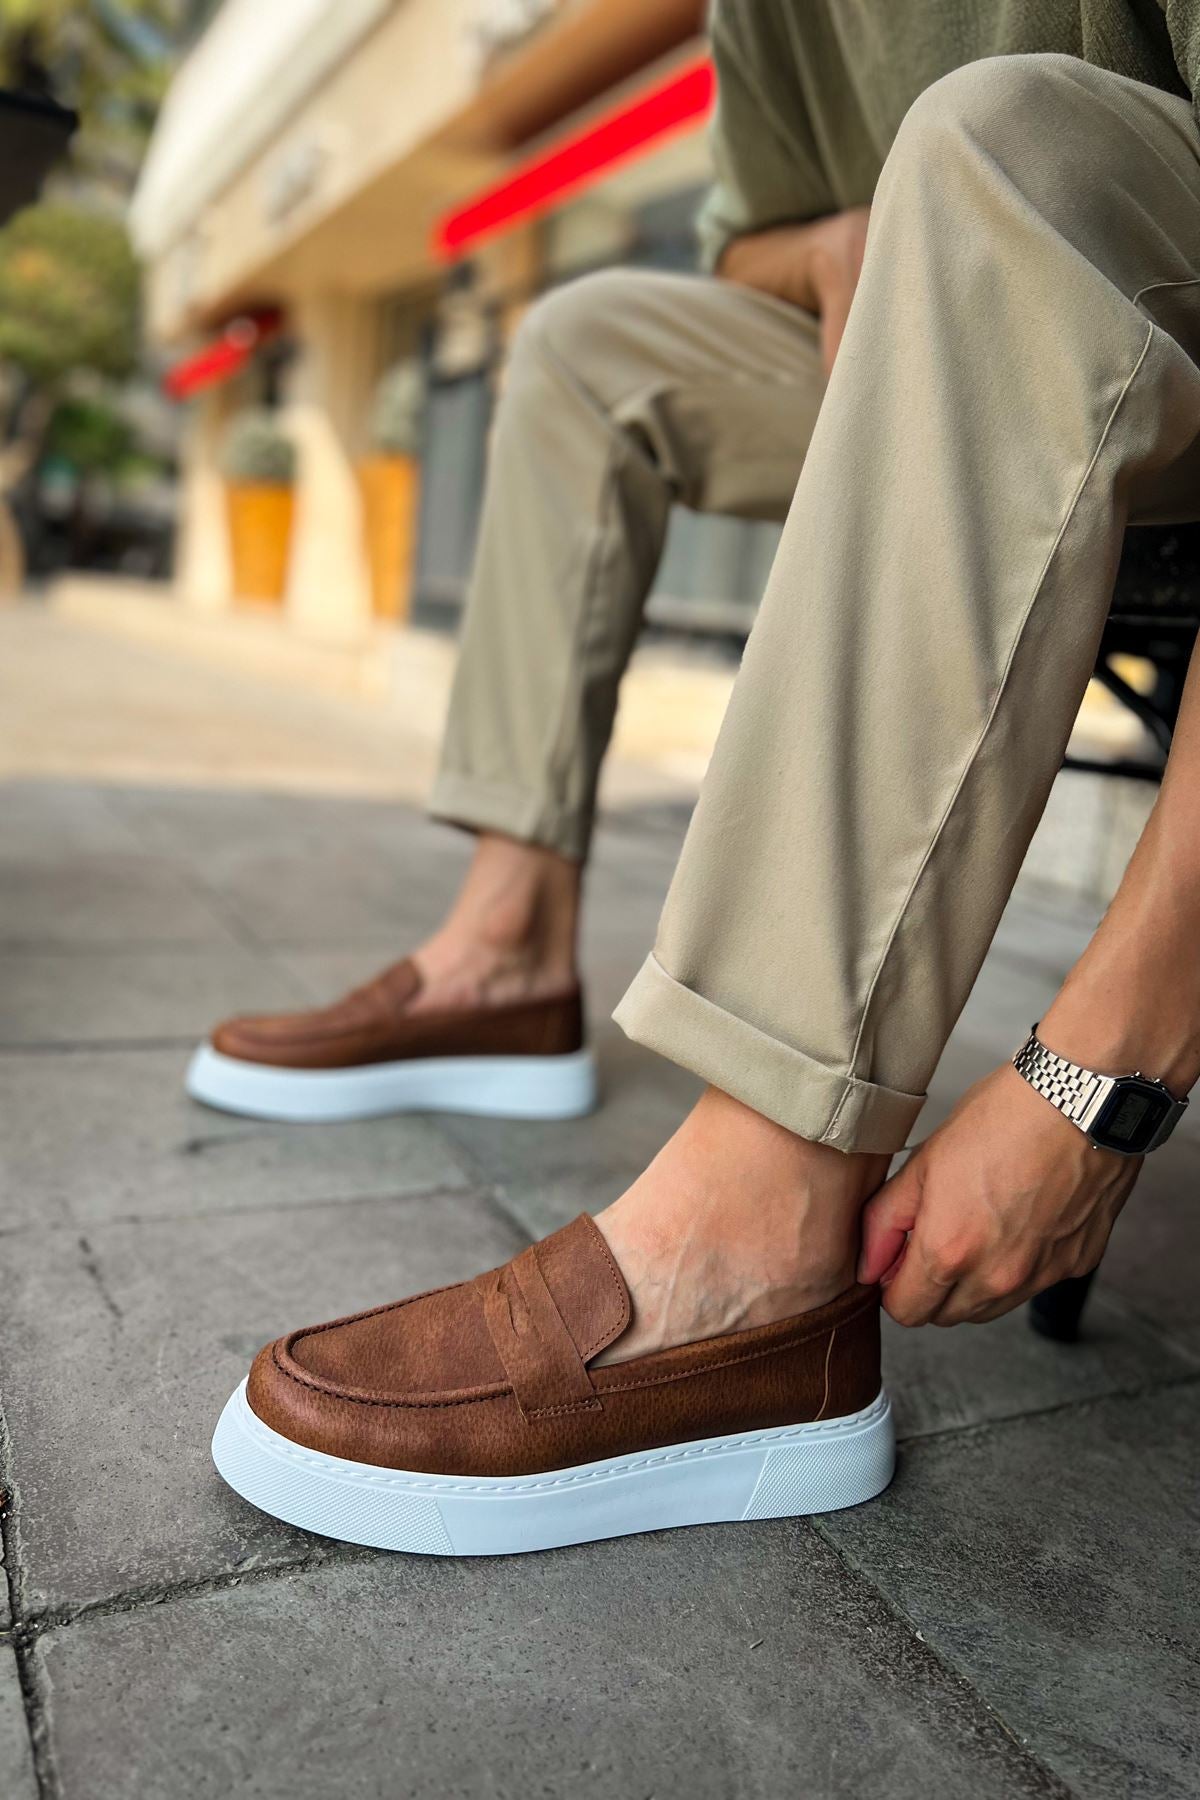 CH421 CBT Bandera Men's Casual Shoes Brown - STREETMODE™